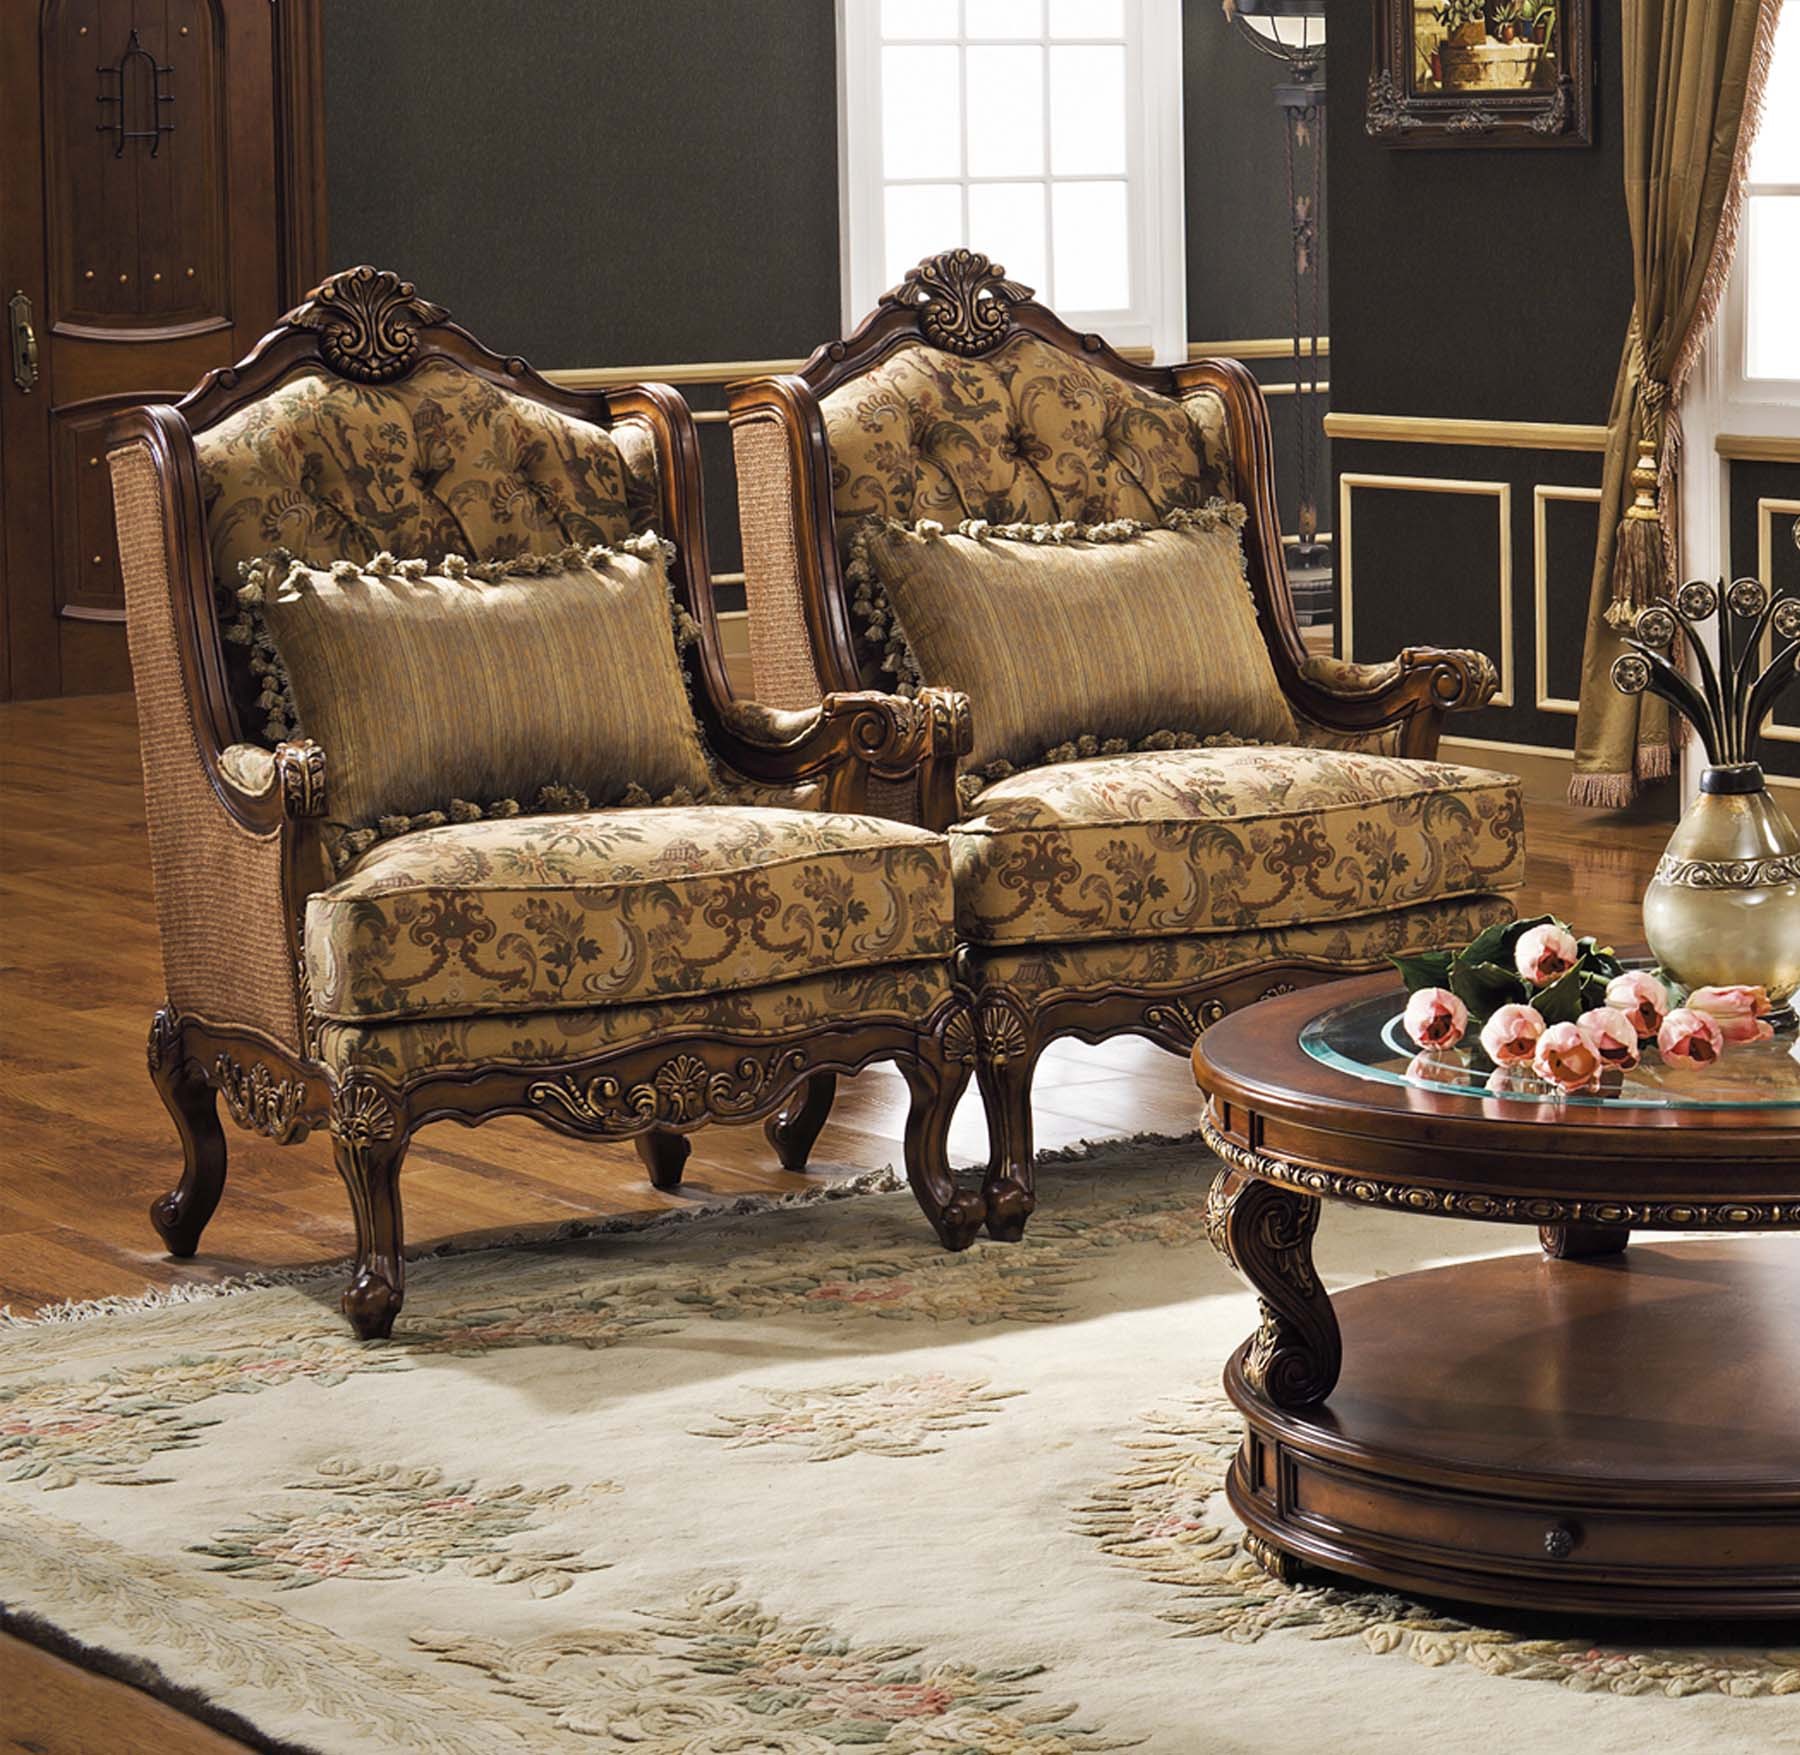 Abbey Occasional Chair shown in Antique Walnut finish